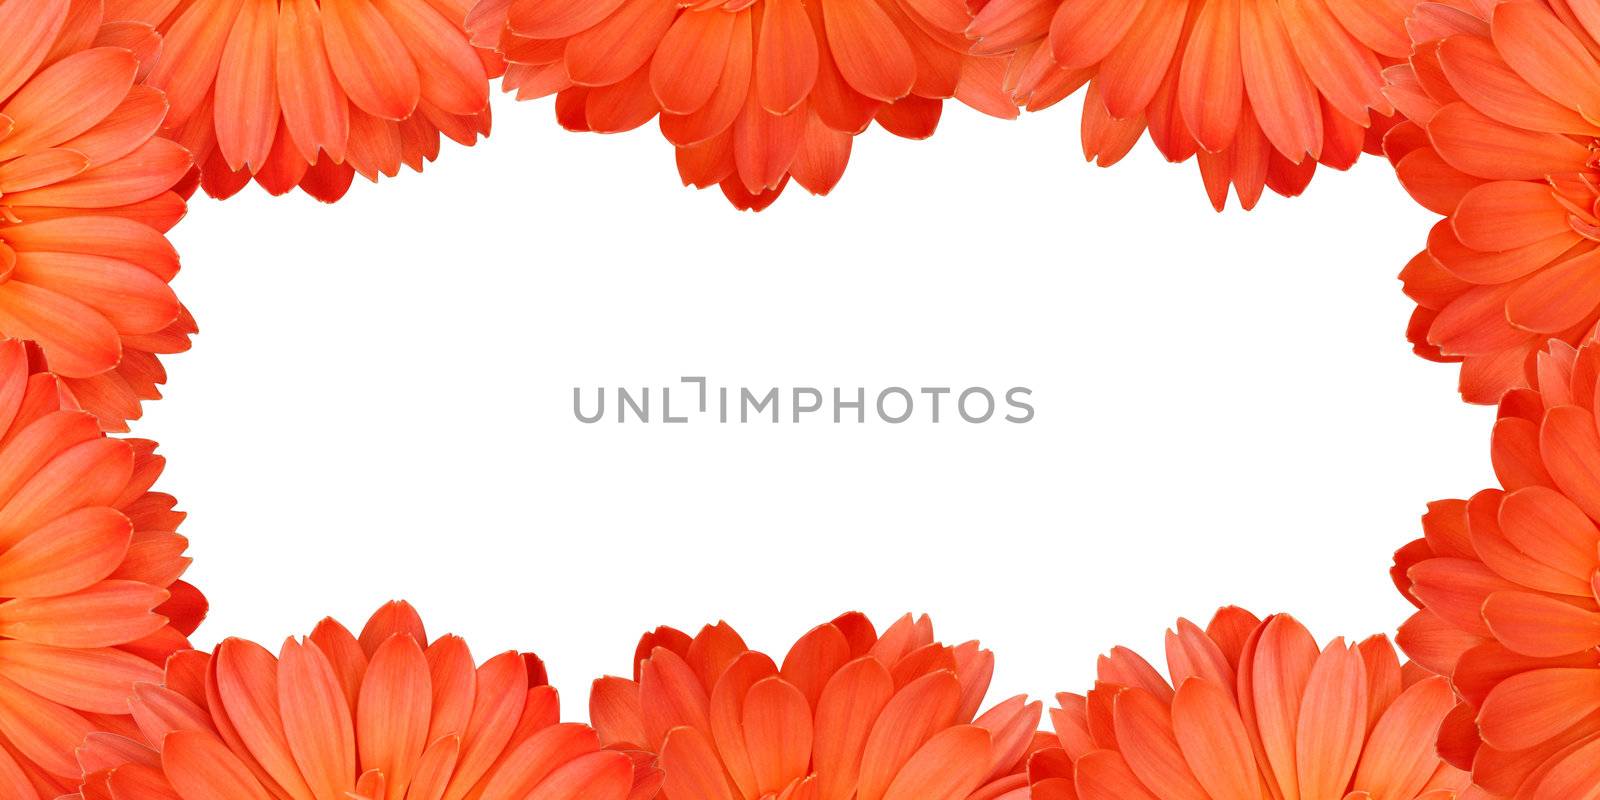 Gerbera flower create a frame on white background by foto76